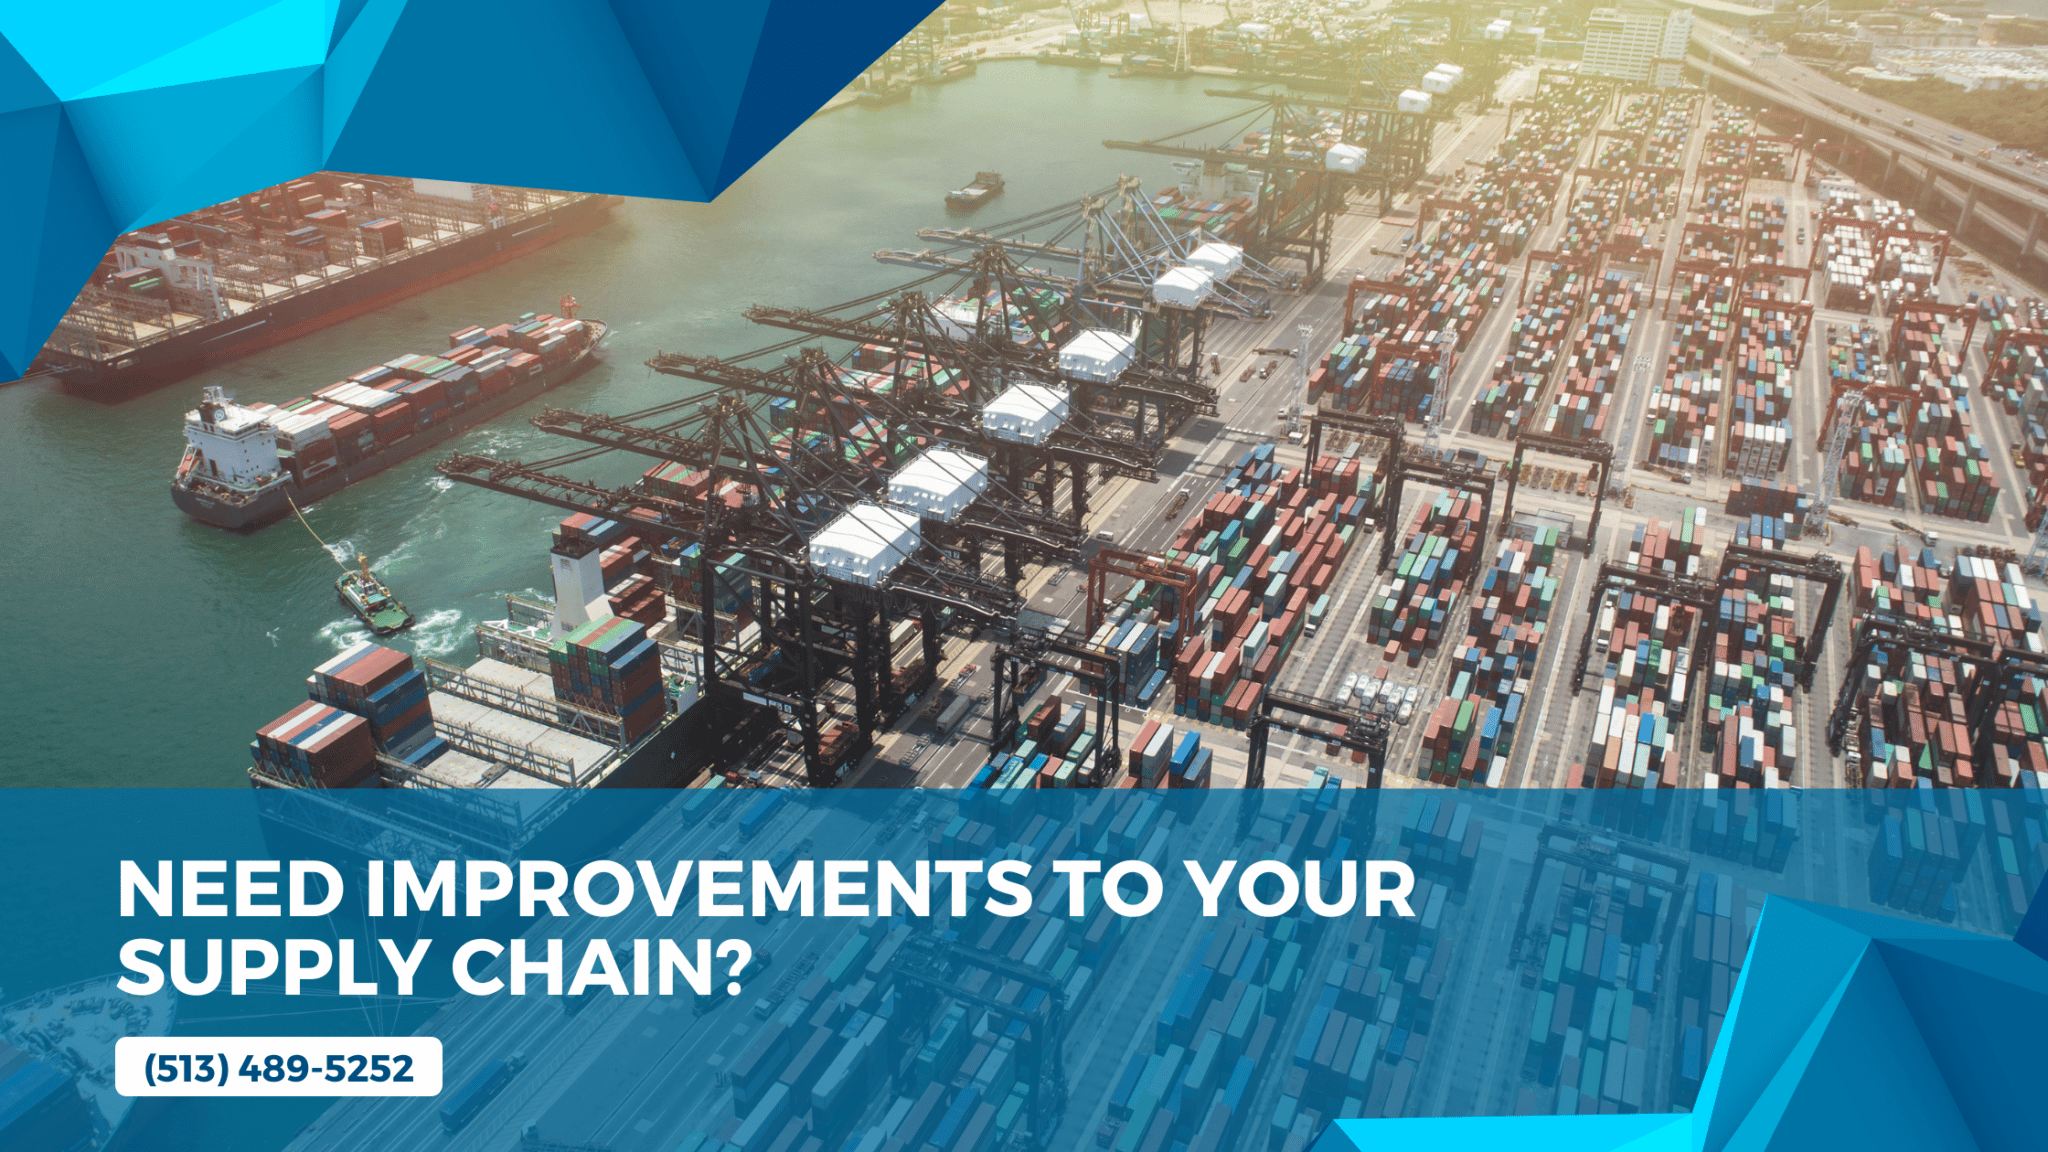 Need Improvements to Your Supply Chain?